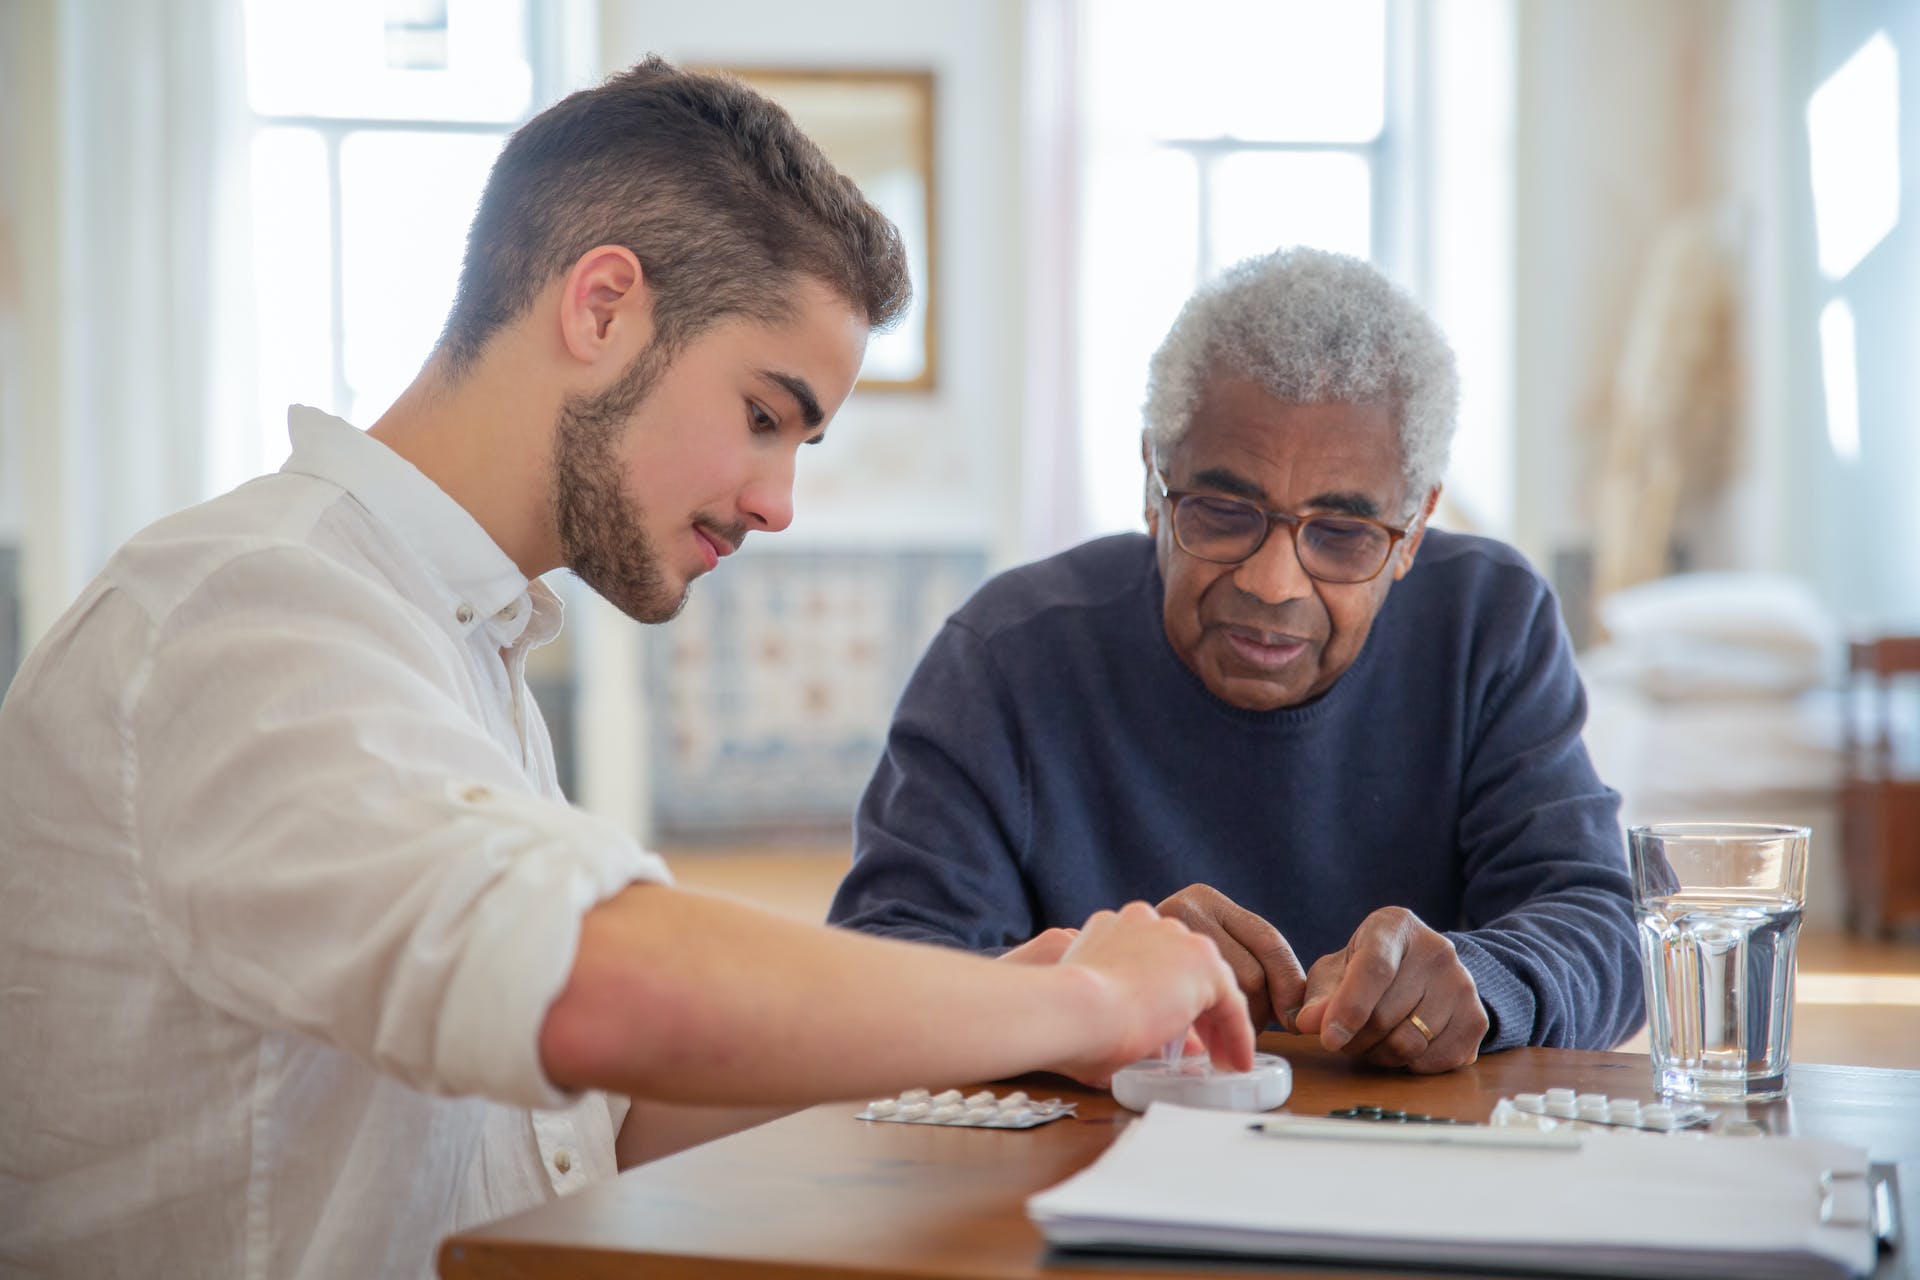 A young man helps an elderly man organize his medications.